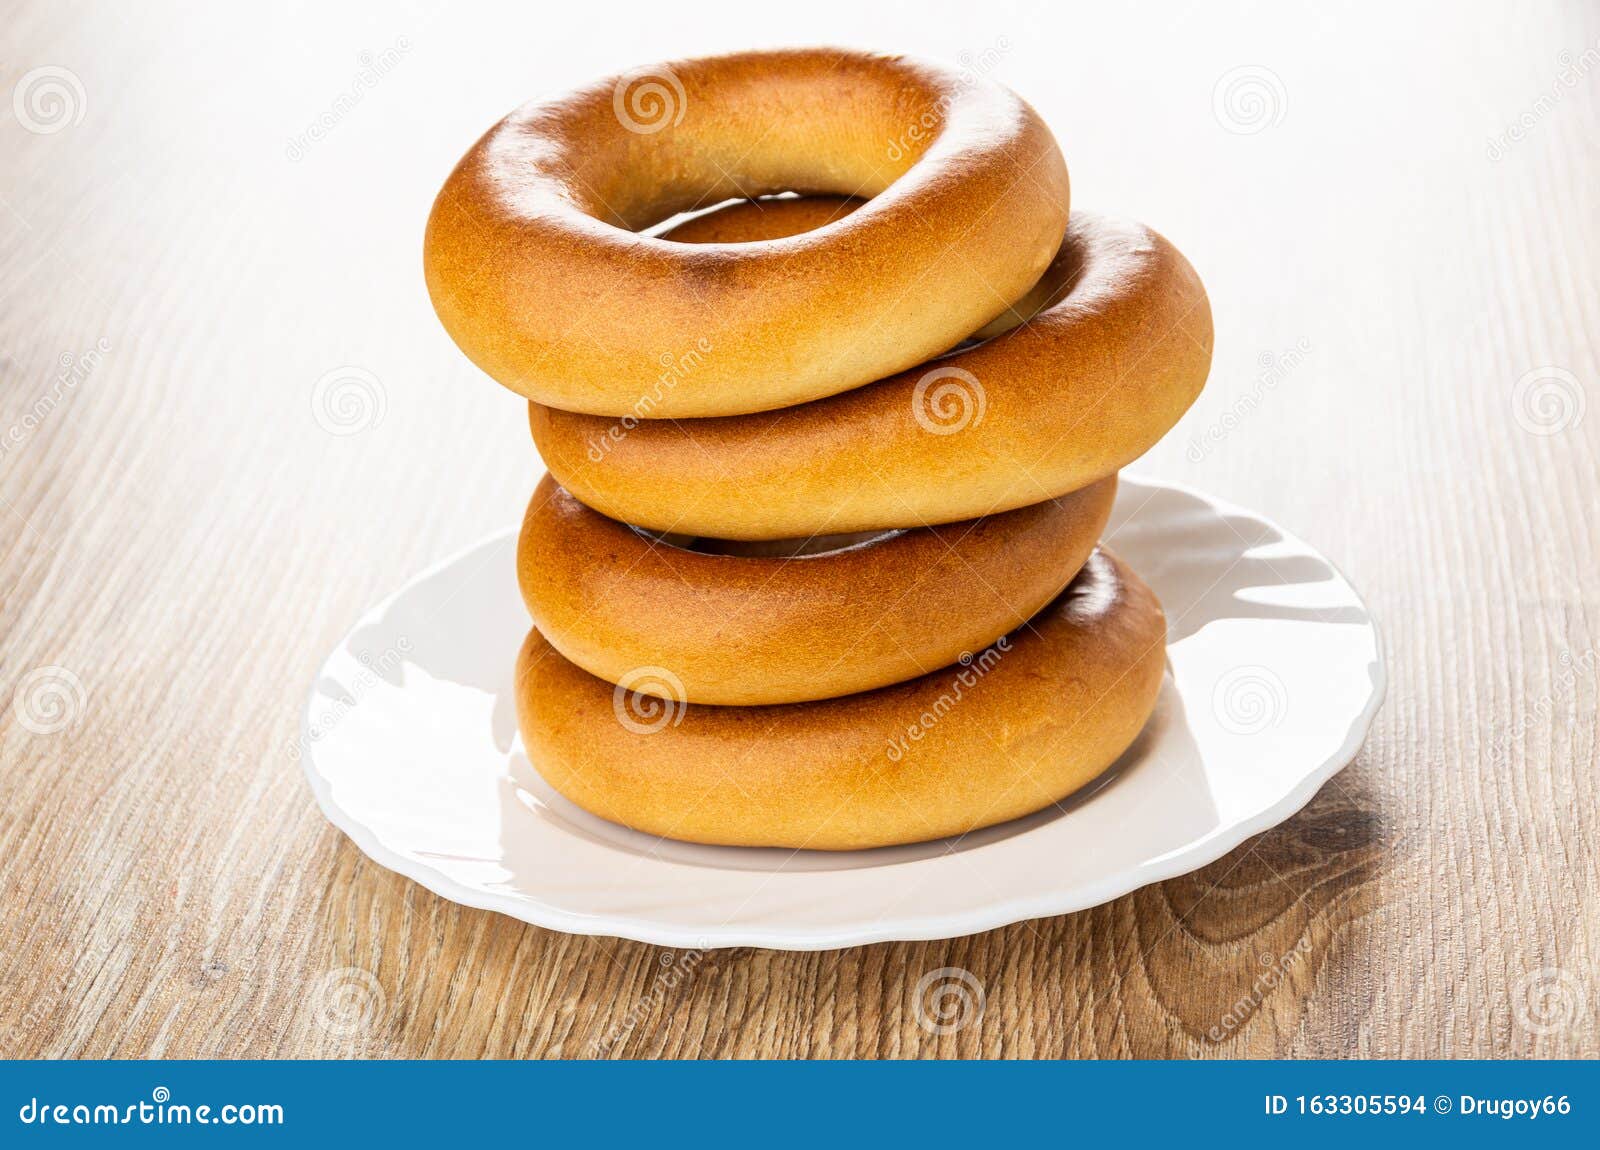 stack of bread rings baranka in plate  on wooden table